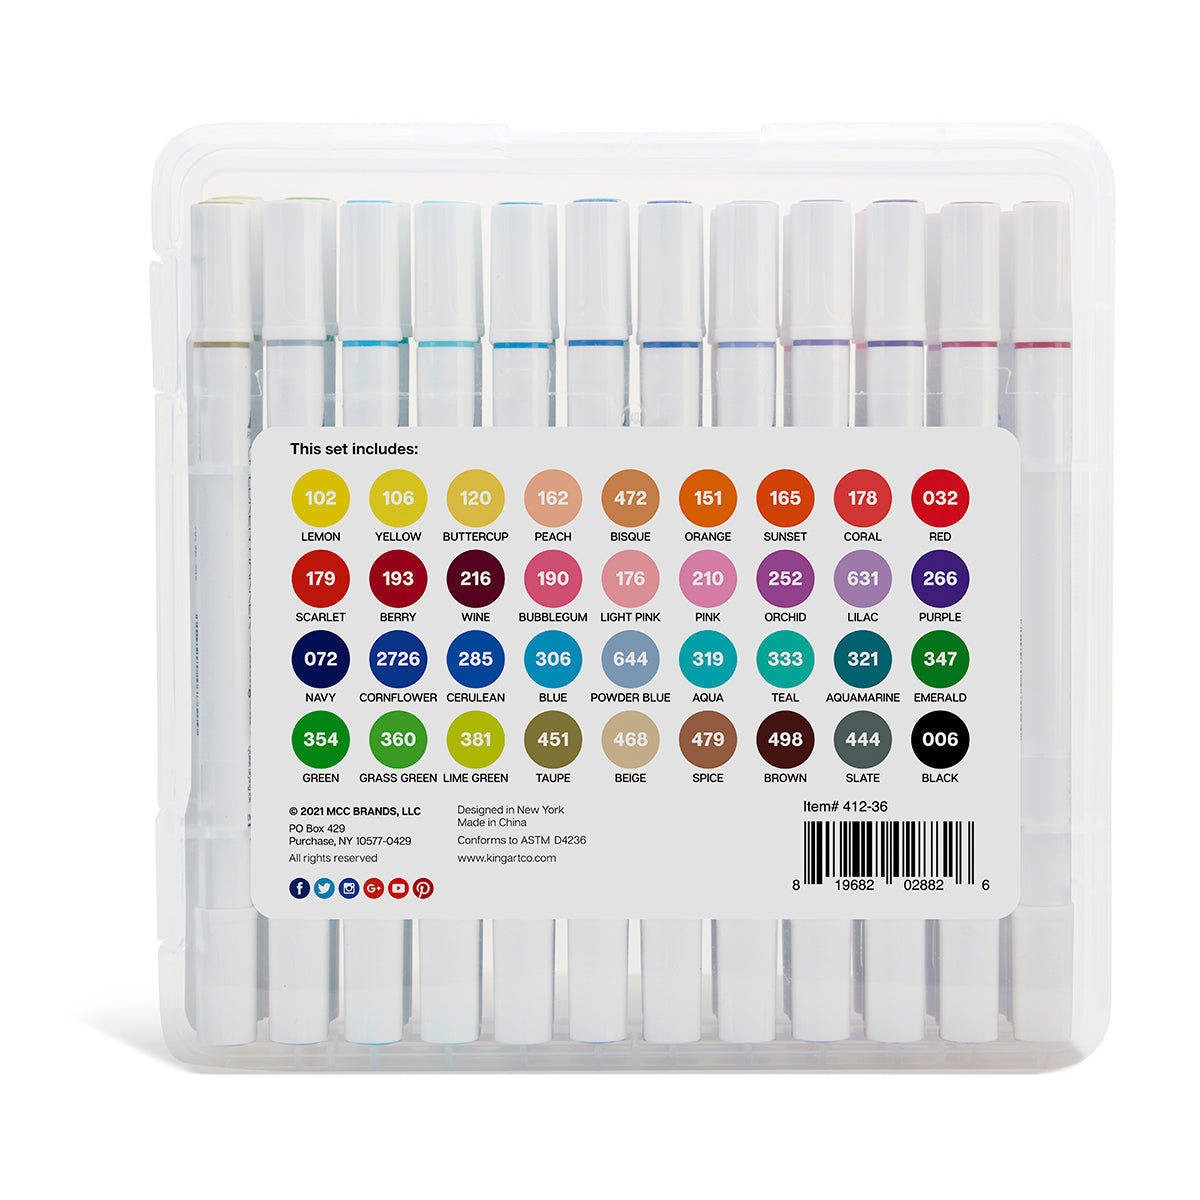 KINGART® Twin-Tip™ Brush & Ultra Fine Markers, Carrying Case, Set of 36  Unique Bright Colors